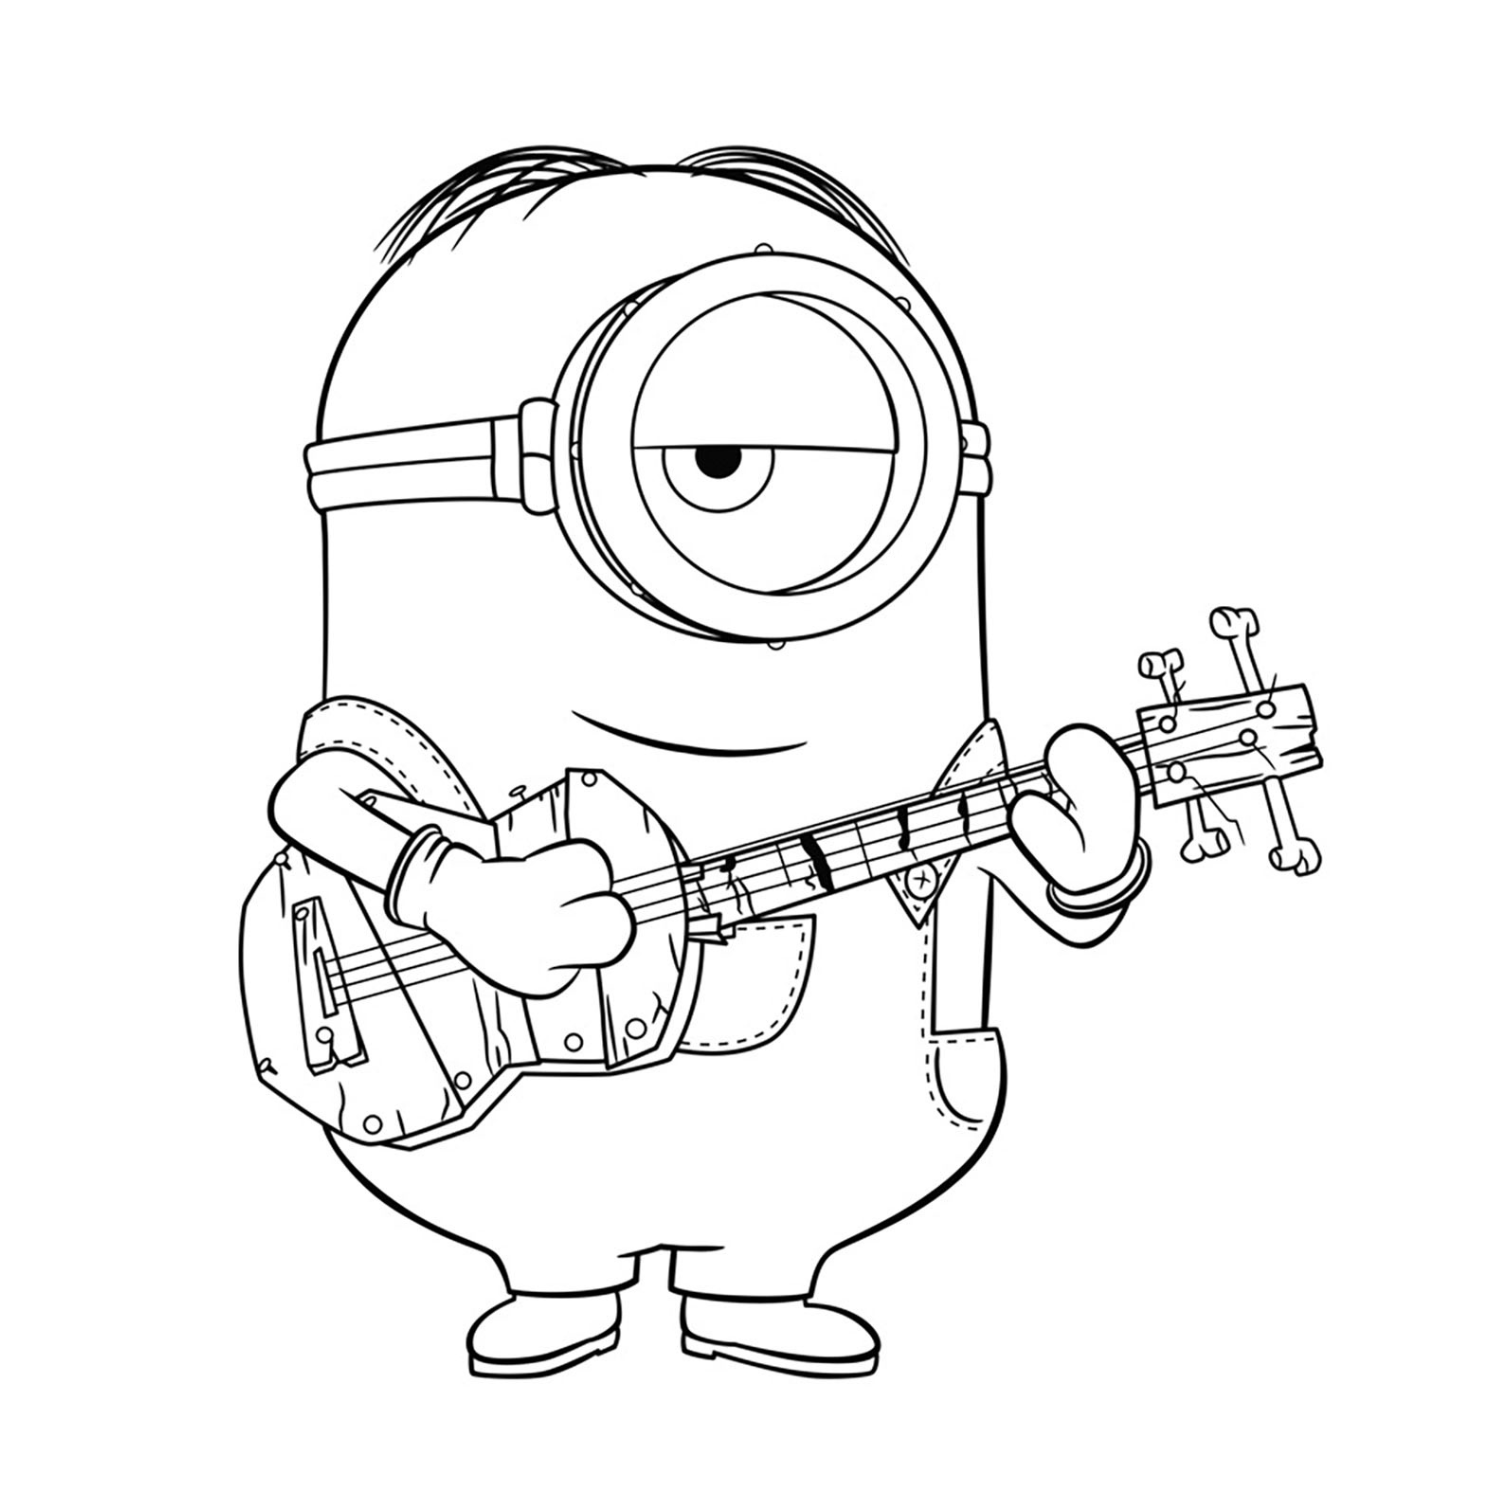 Minions coloring bookkeep your child entertained with our printable minions col made by teachers